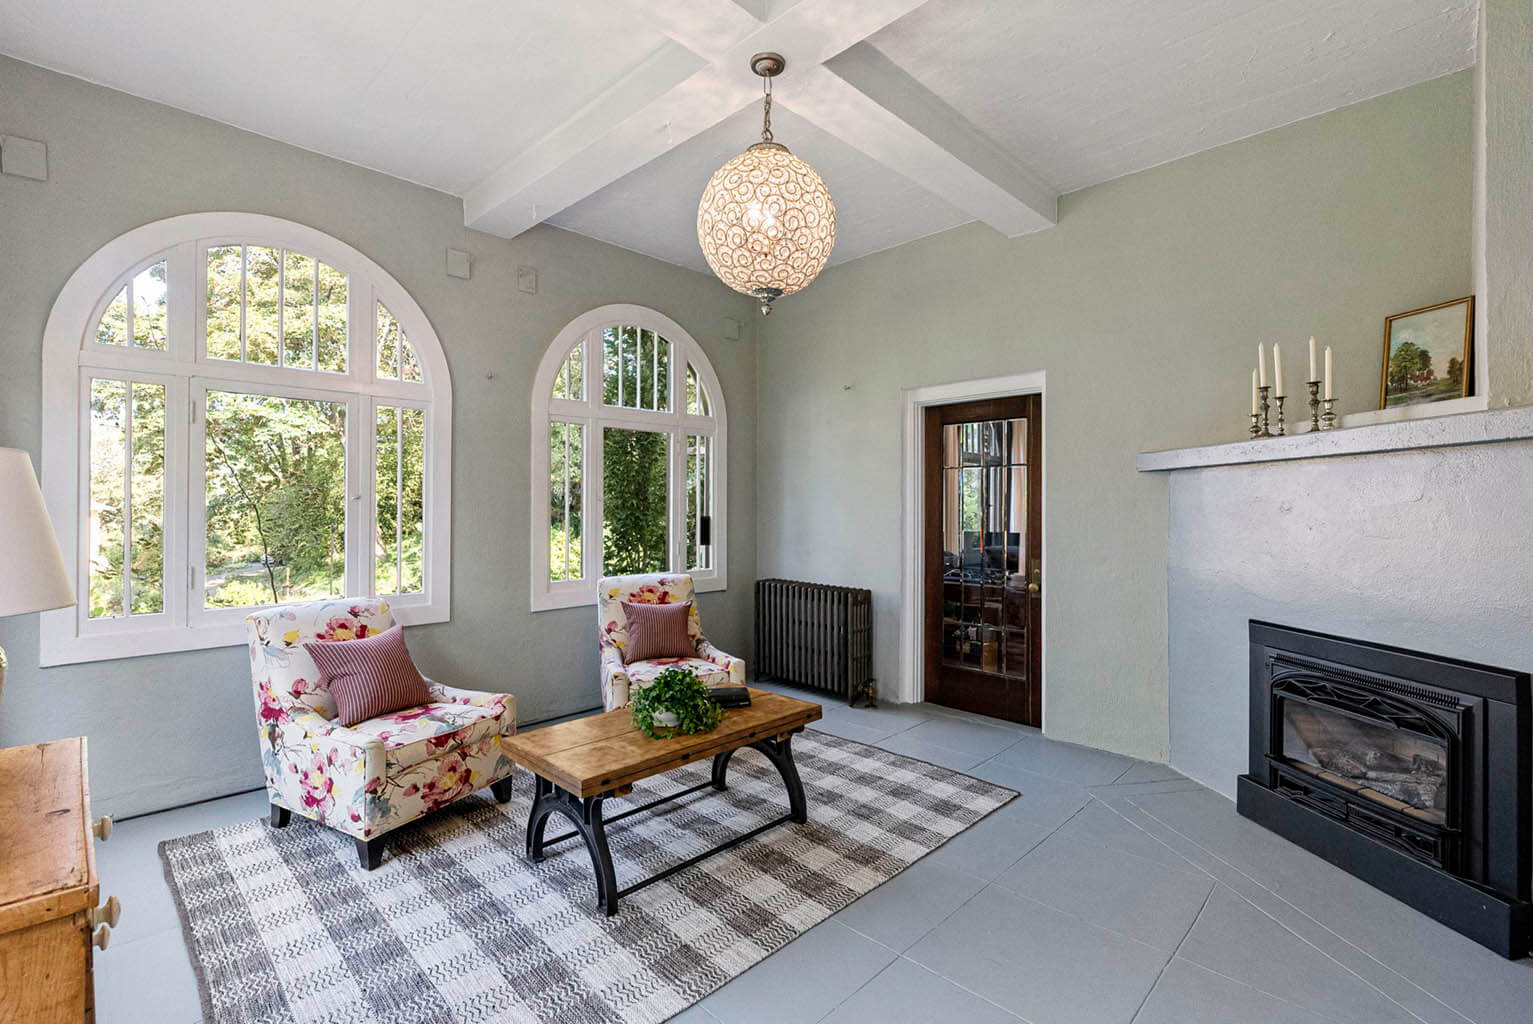 Enclosed porch with fireplace and Palladian windows is accessible from the library or the living room